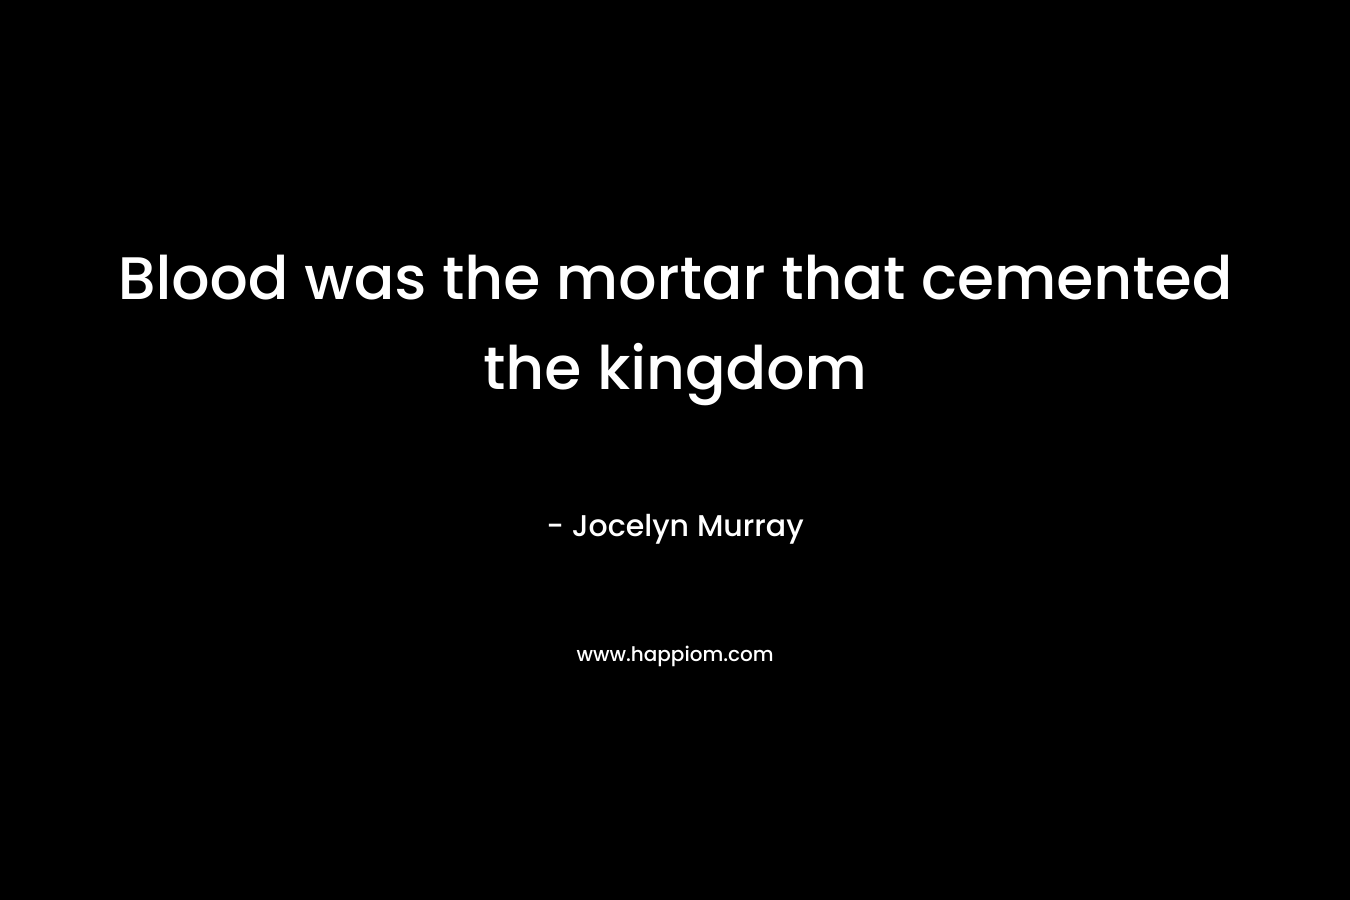 Blood was the mortar that cemented the kingdom